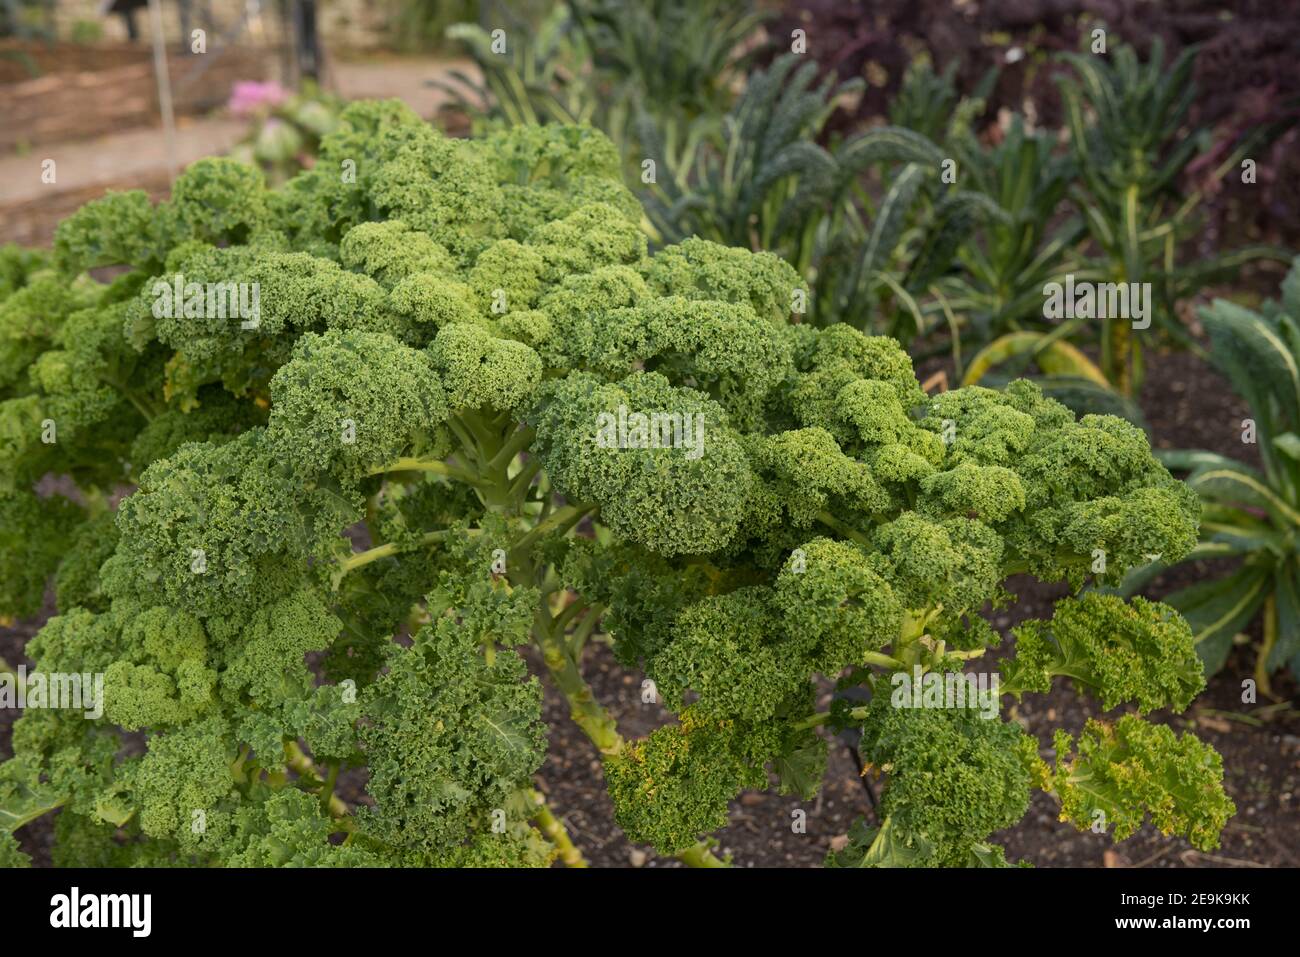 Crop of Autumn Home Grown Organic Dwarf Green Curled Kale (Brassica oleracea 'Acephala Group') Growing on an Allotment in a Vegetable Garden in Devon Stock Photo